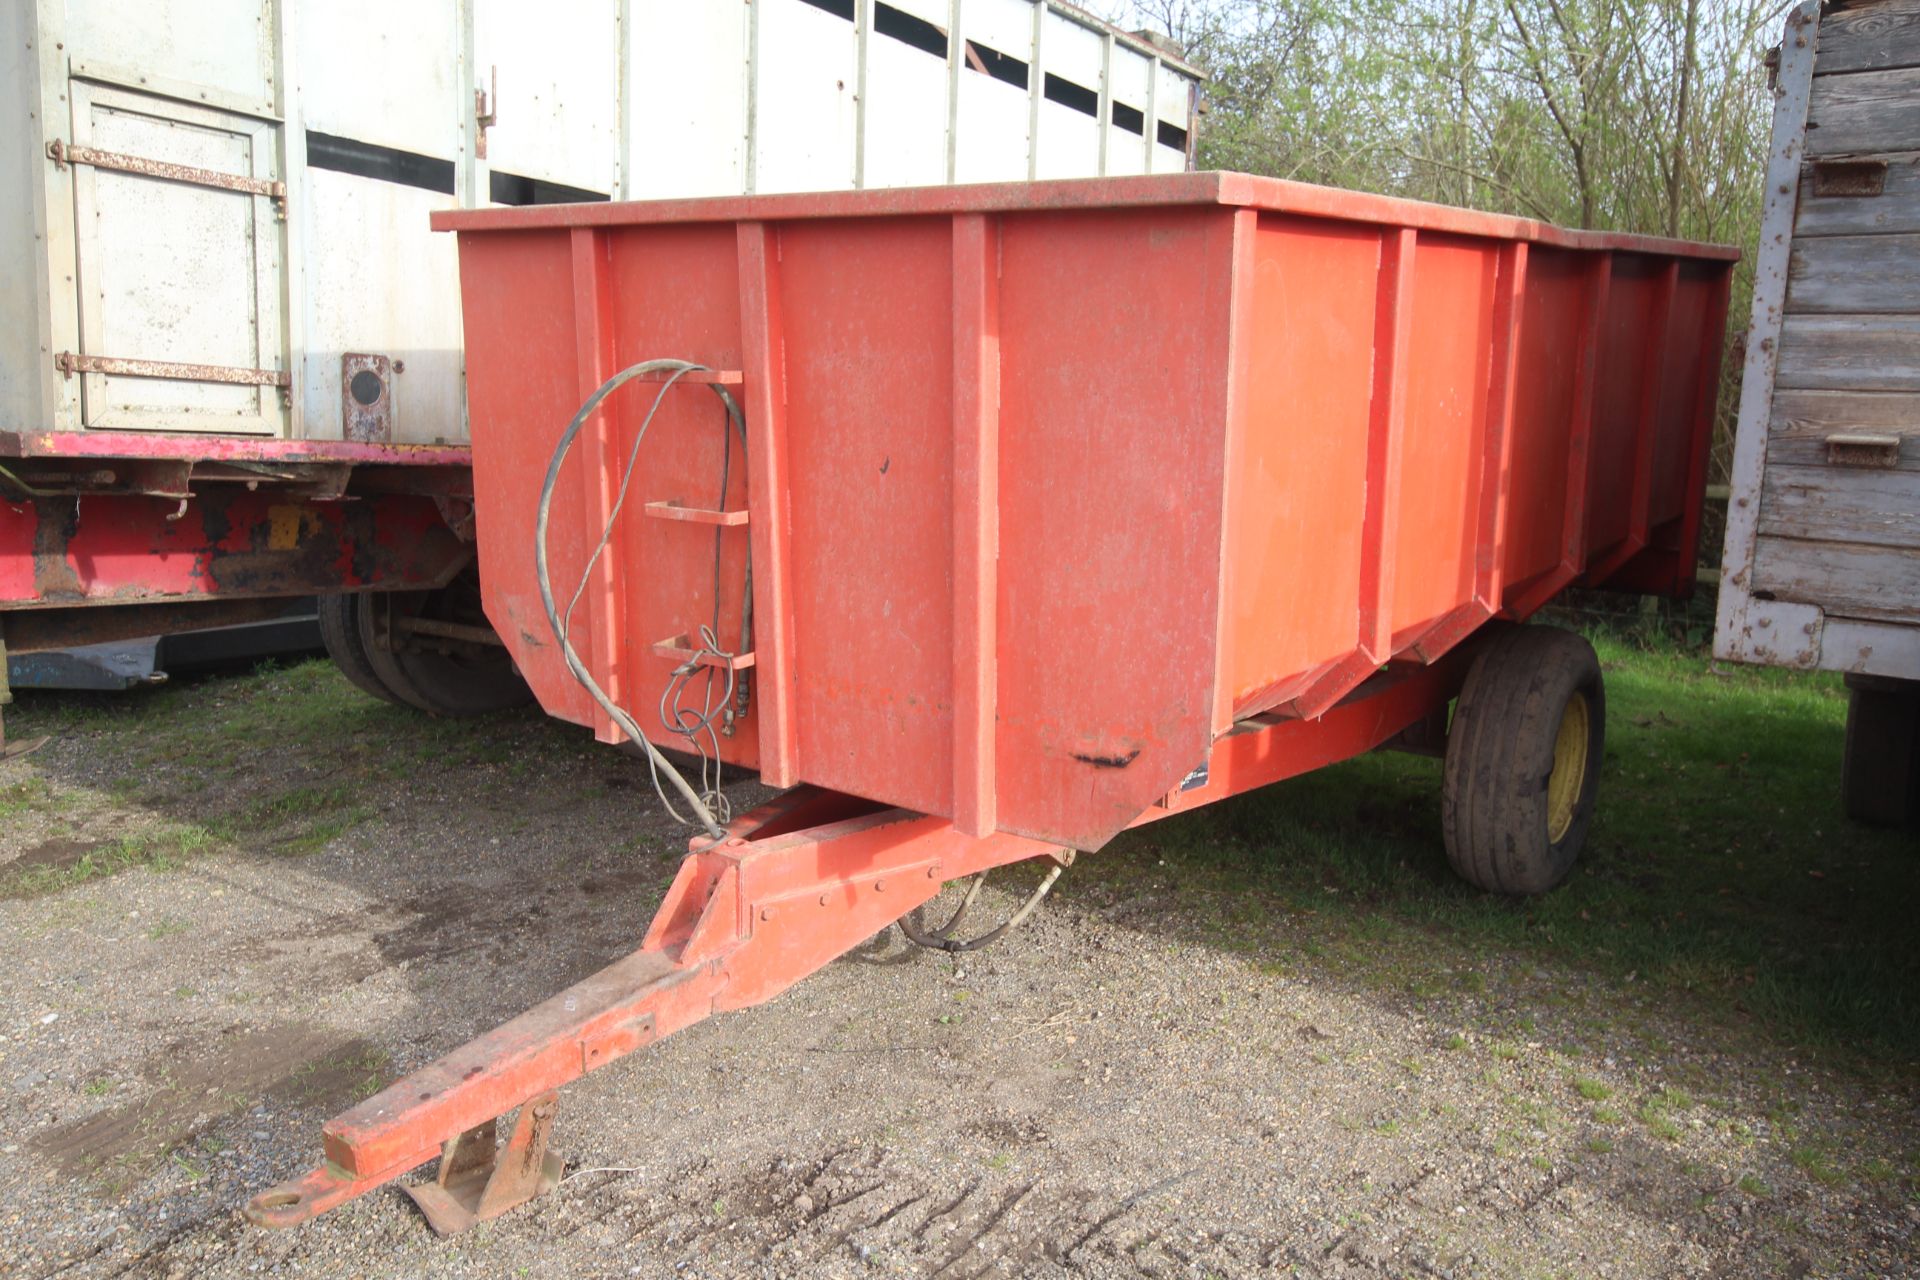 Massey Ferguson/ Weeks 6T single axle tipping trailer. From a local Deceased estate.